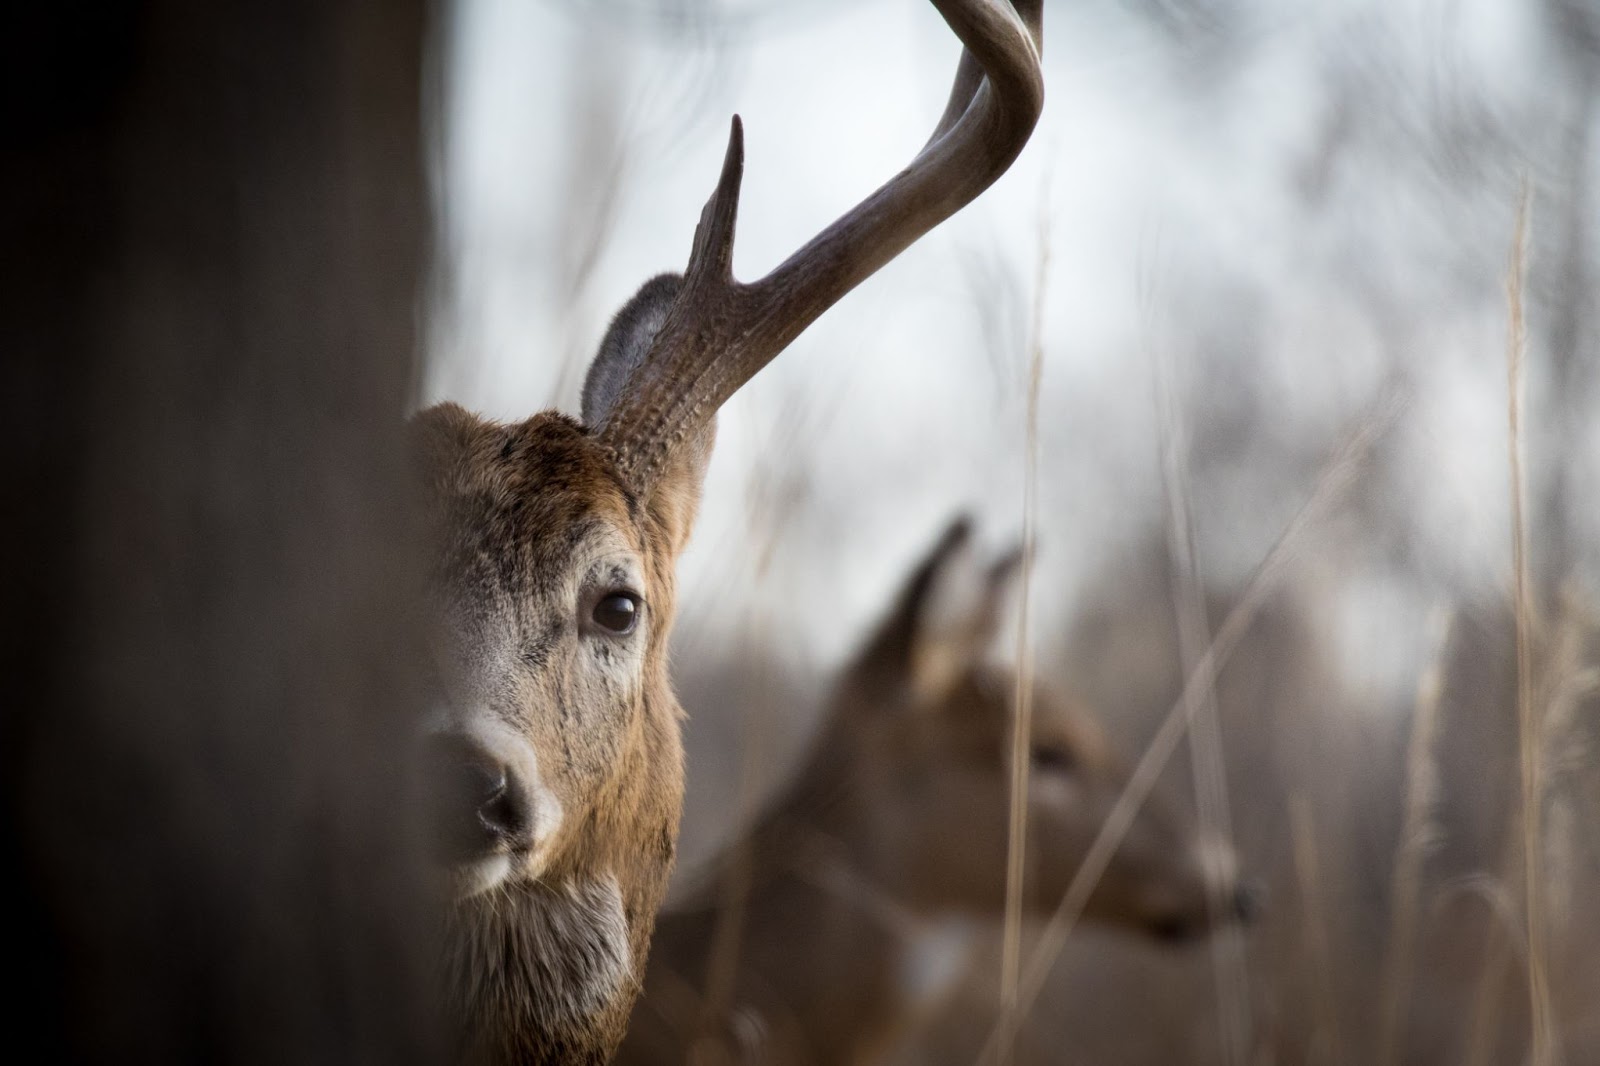 A deer cautiously peers through dense brush in Mexico during a hunting trip with hunting guides